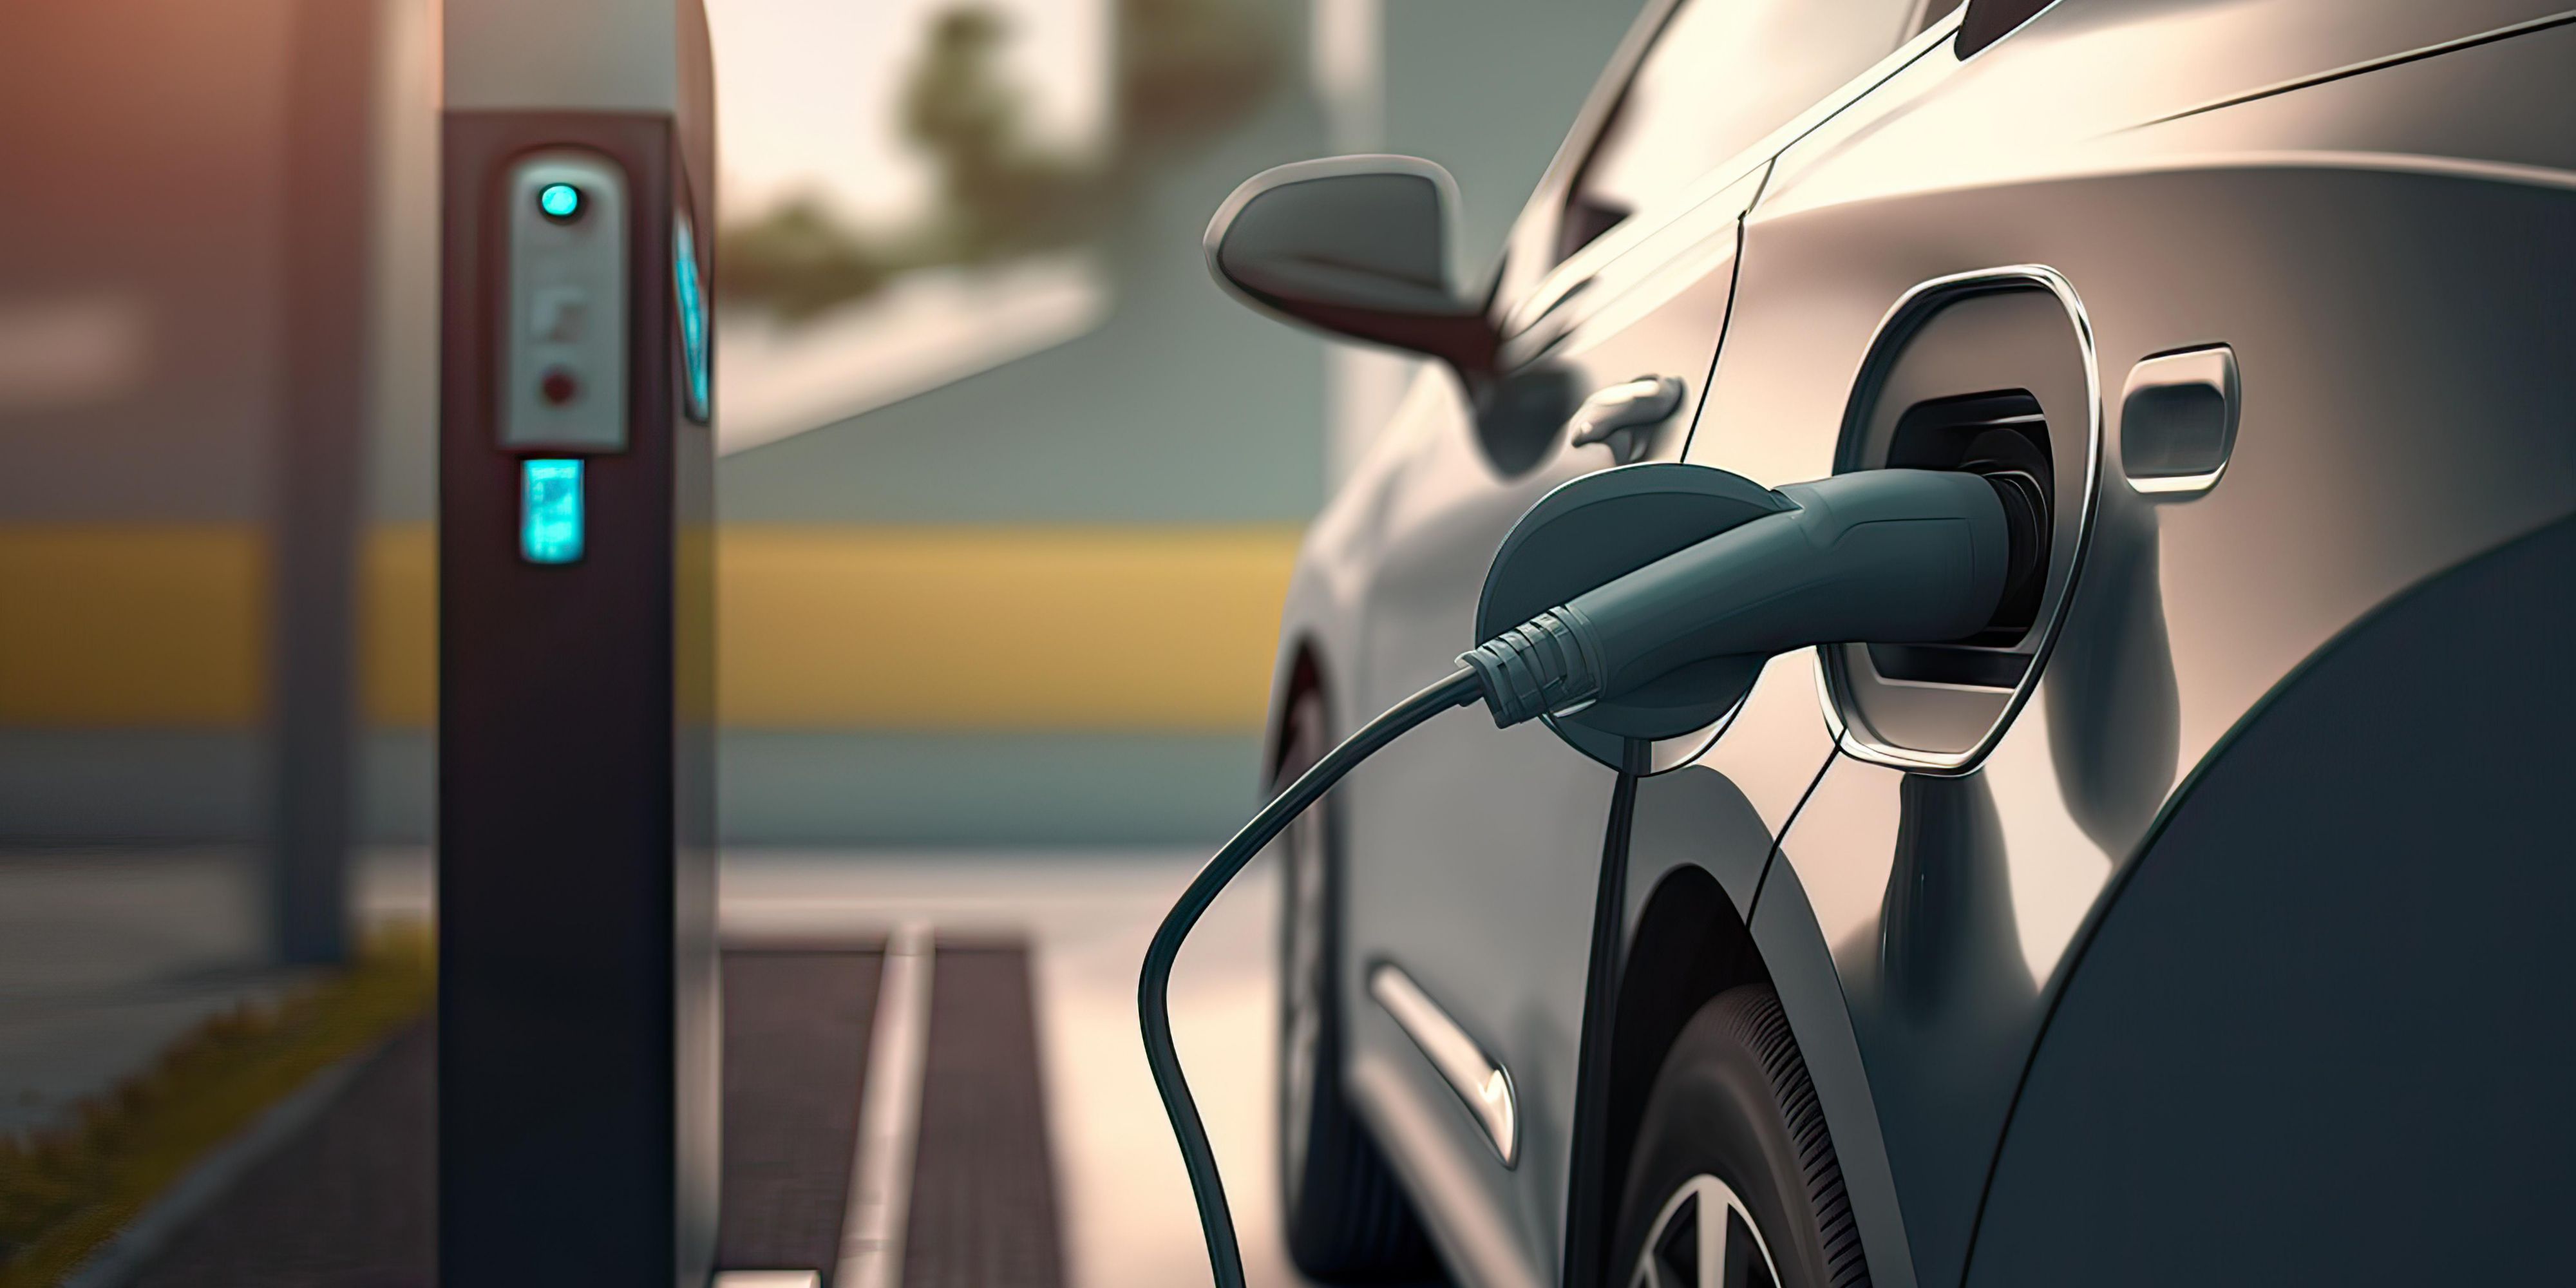 There are EV Superchargers available just minutes away on State Route 46.